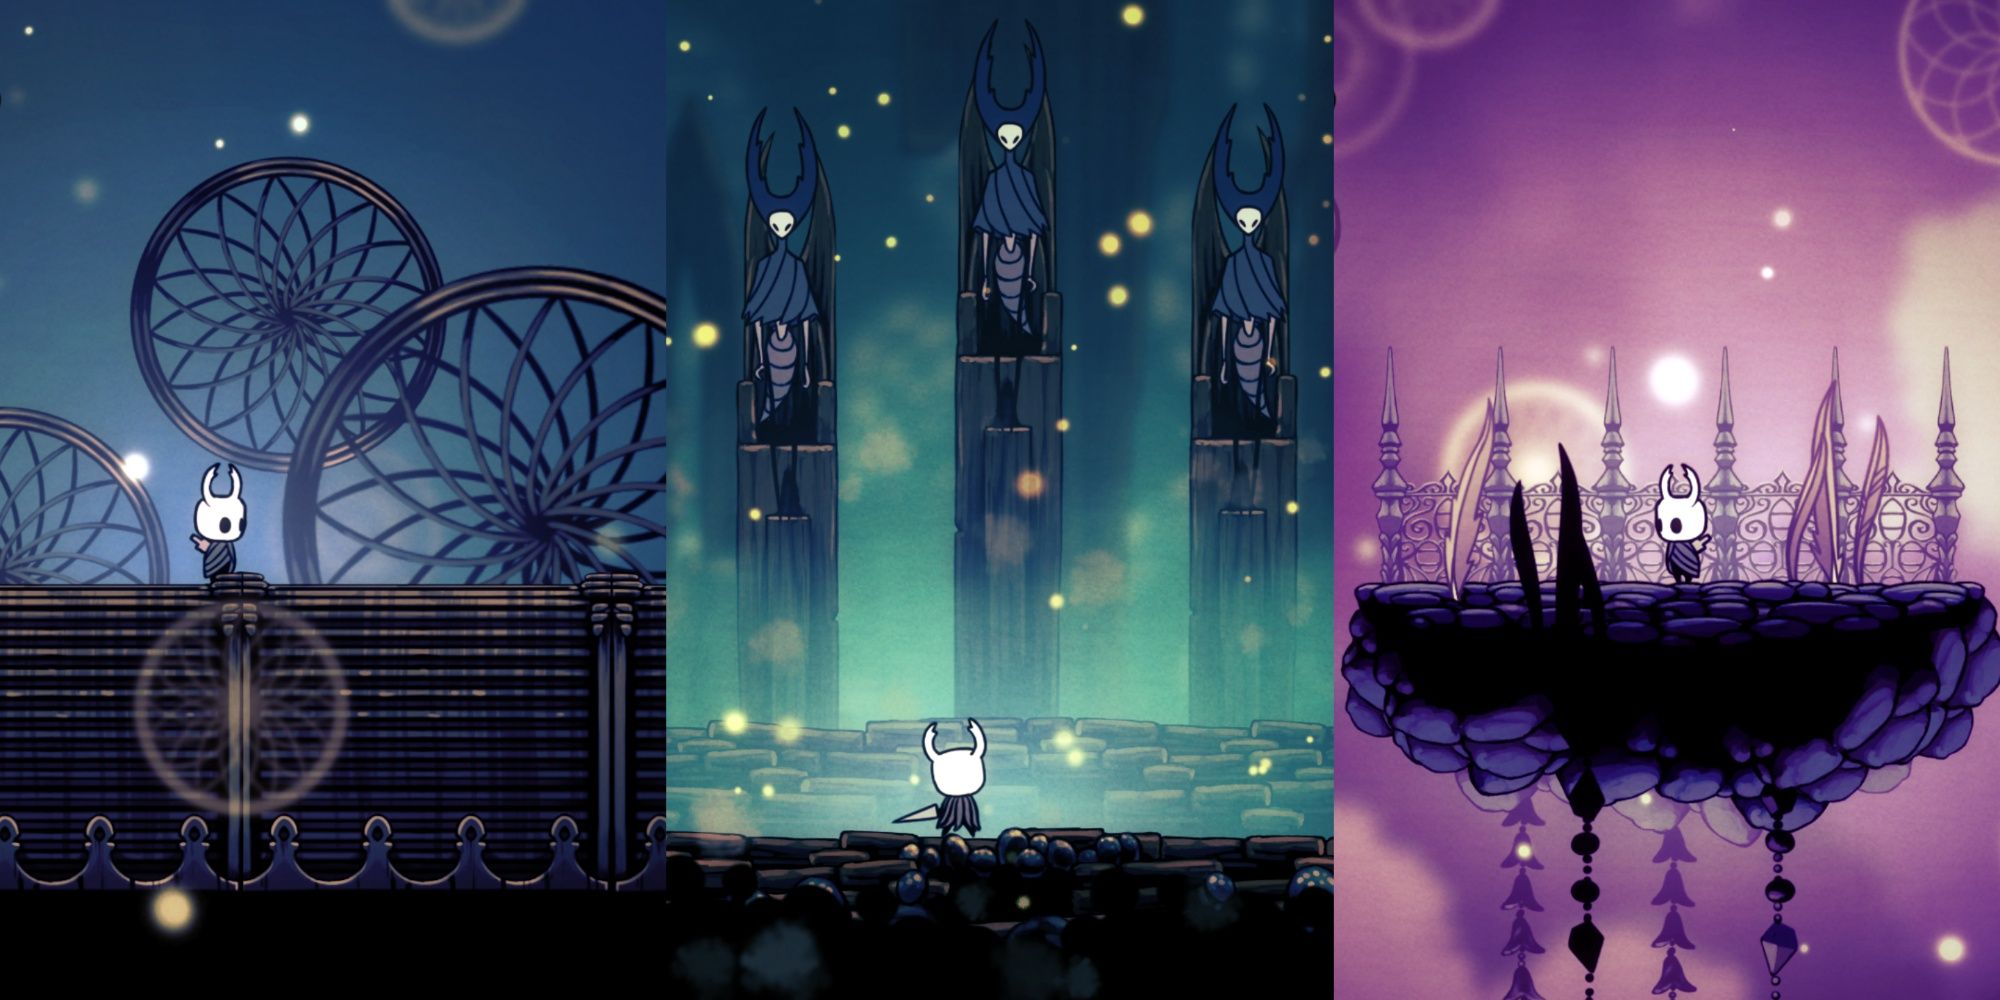 featured image with knight in different locations, on tram top, against mantis lords and in dream realm